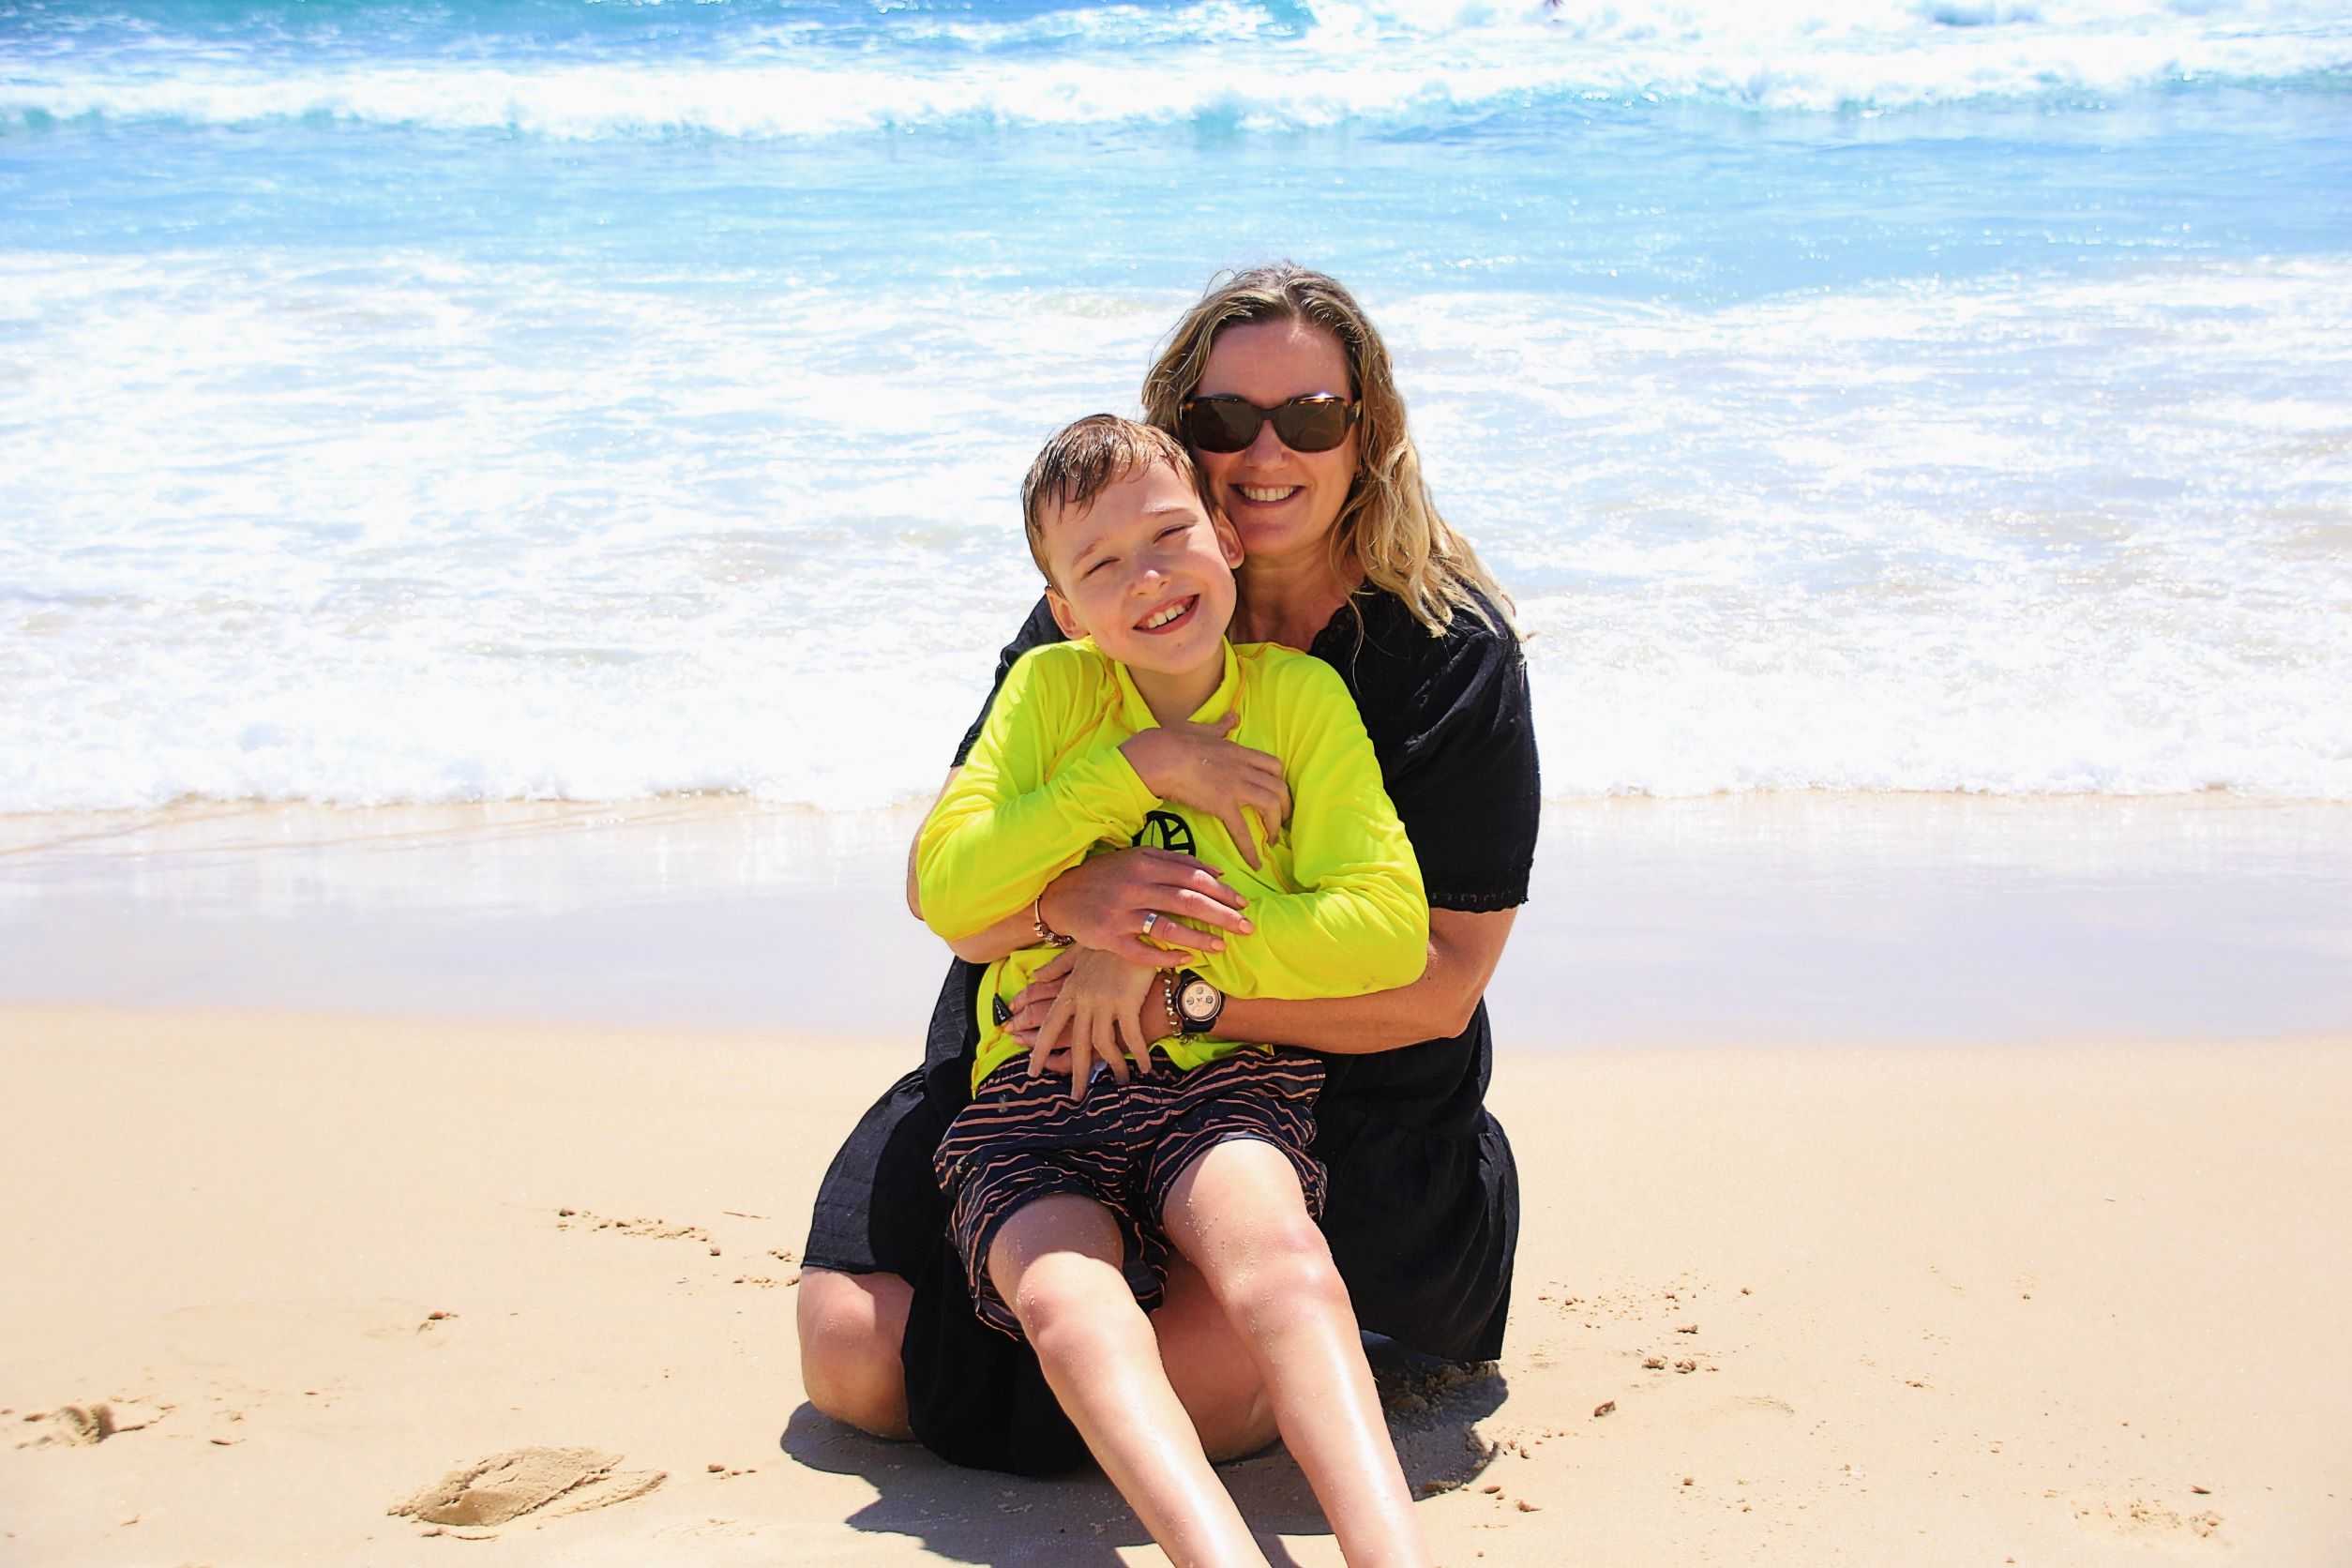 Smiling boy in surfing gear on the lap of his mother who is sitting on the sand by the beach